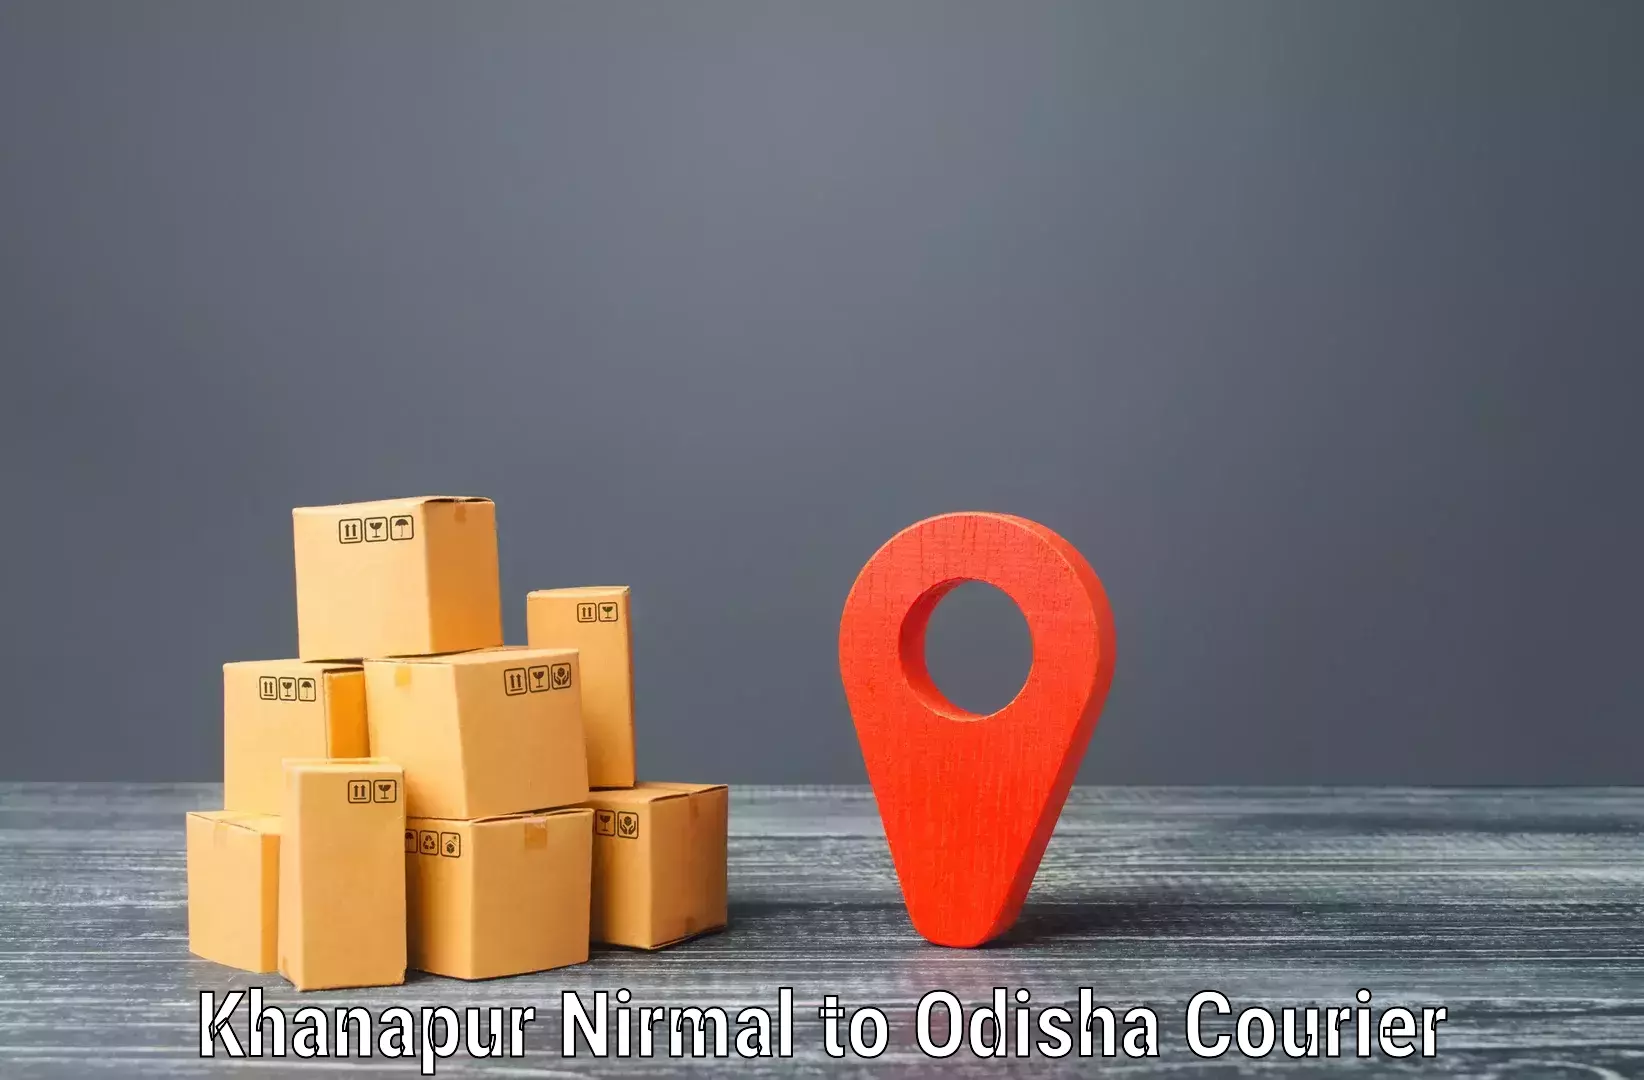 Multi-national courier services Khanapur Nirmal to Madanpur Rampur